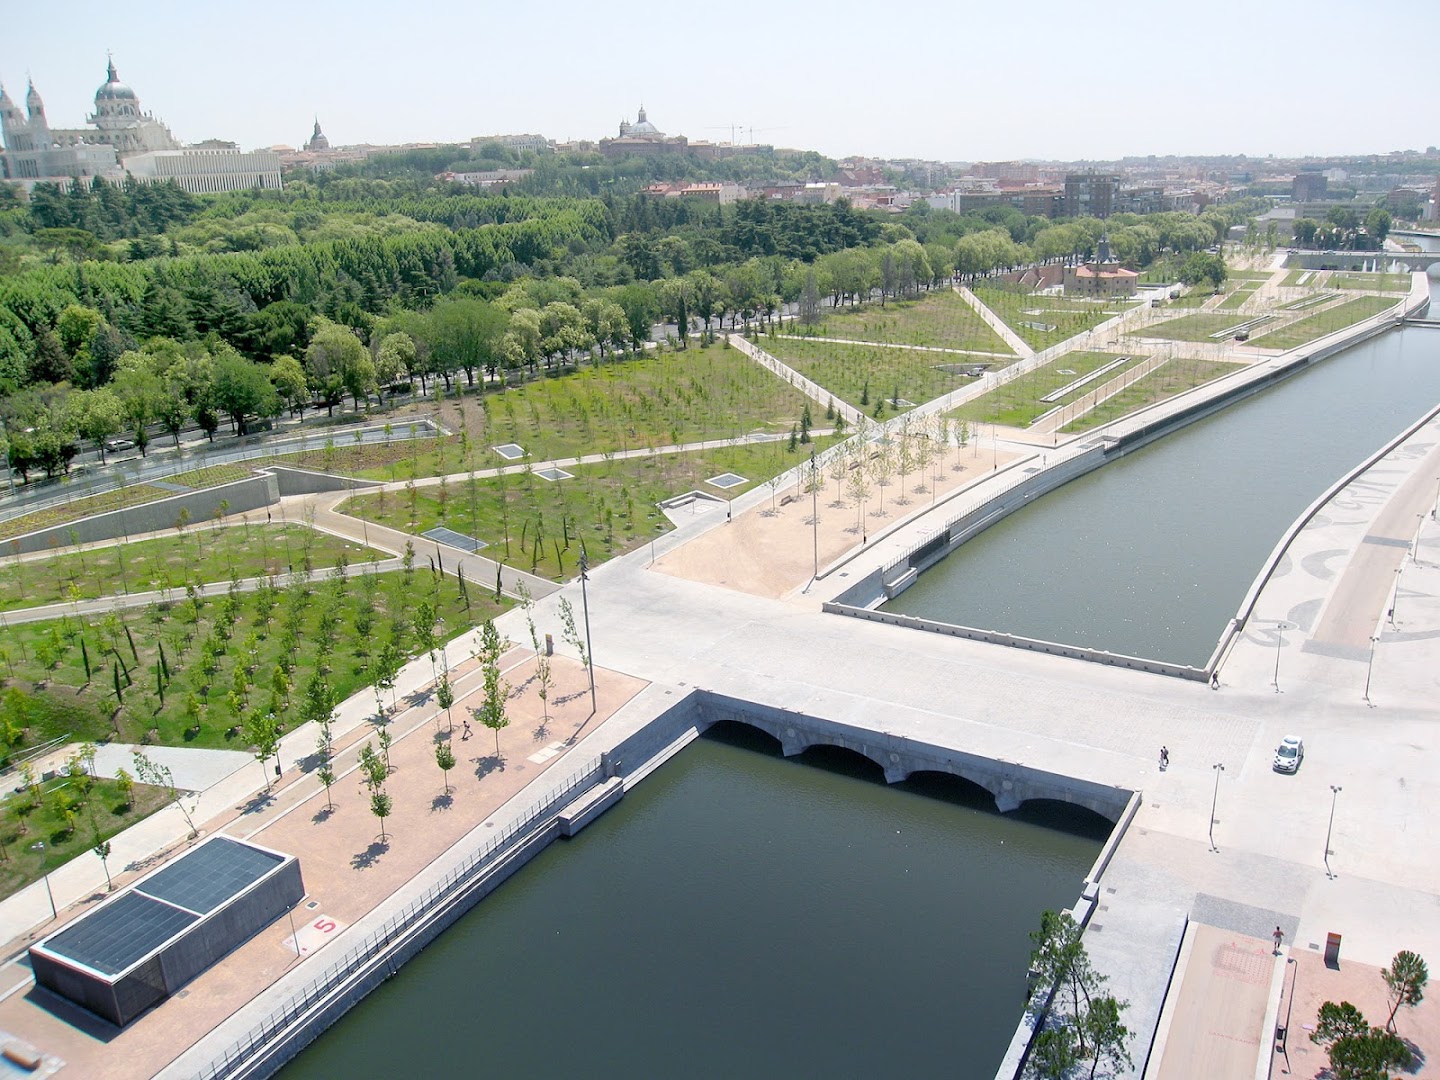 Birds eye view of the Salón de Pinos, featuring the river and plantings.